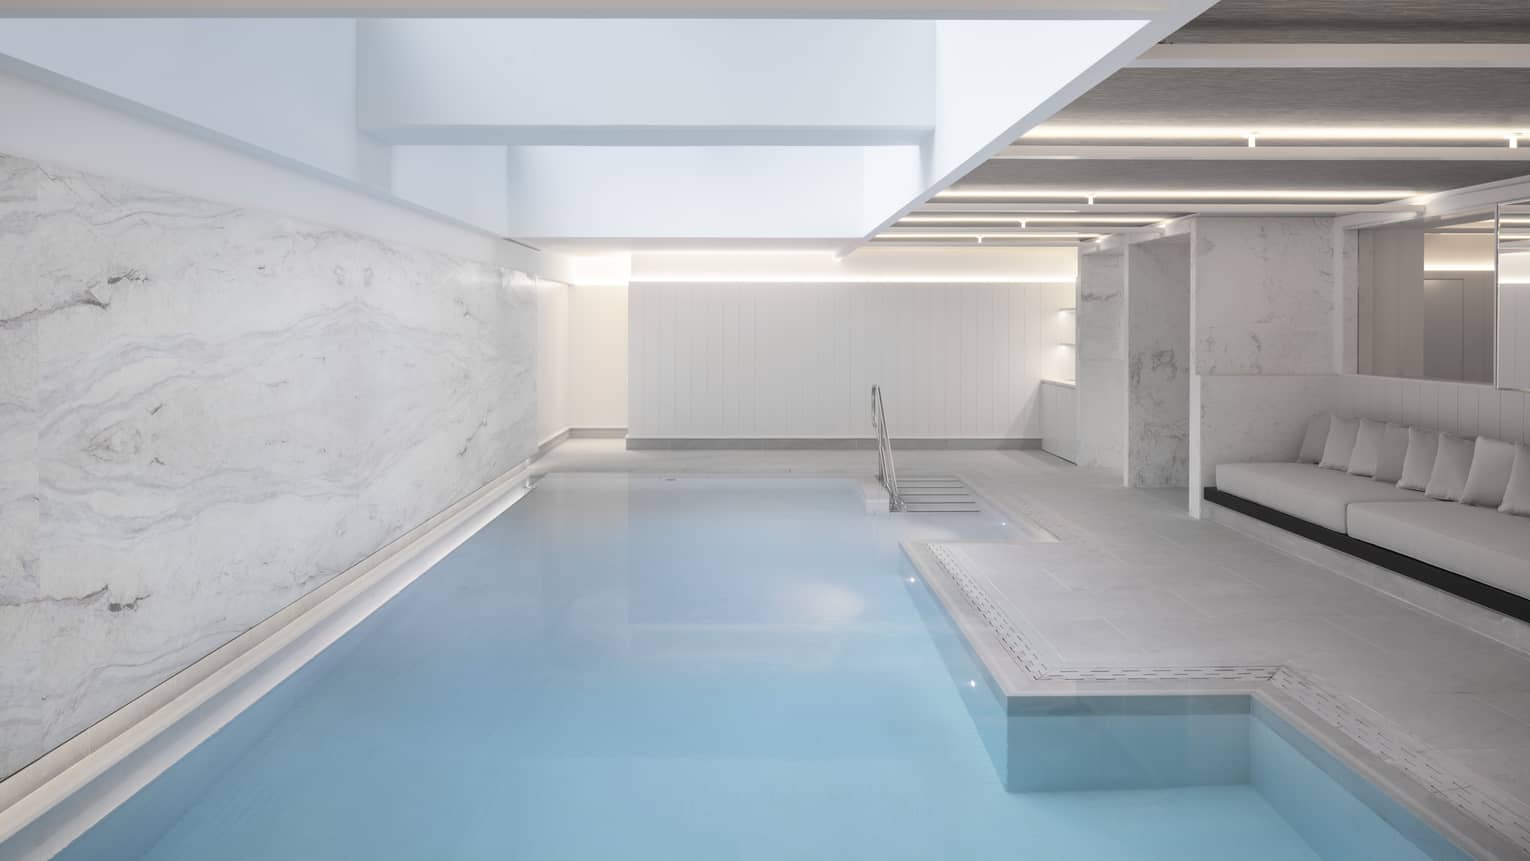 Indoor pool at spa, banquet of seating on one side, marbled wall on other 